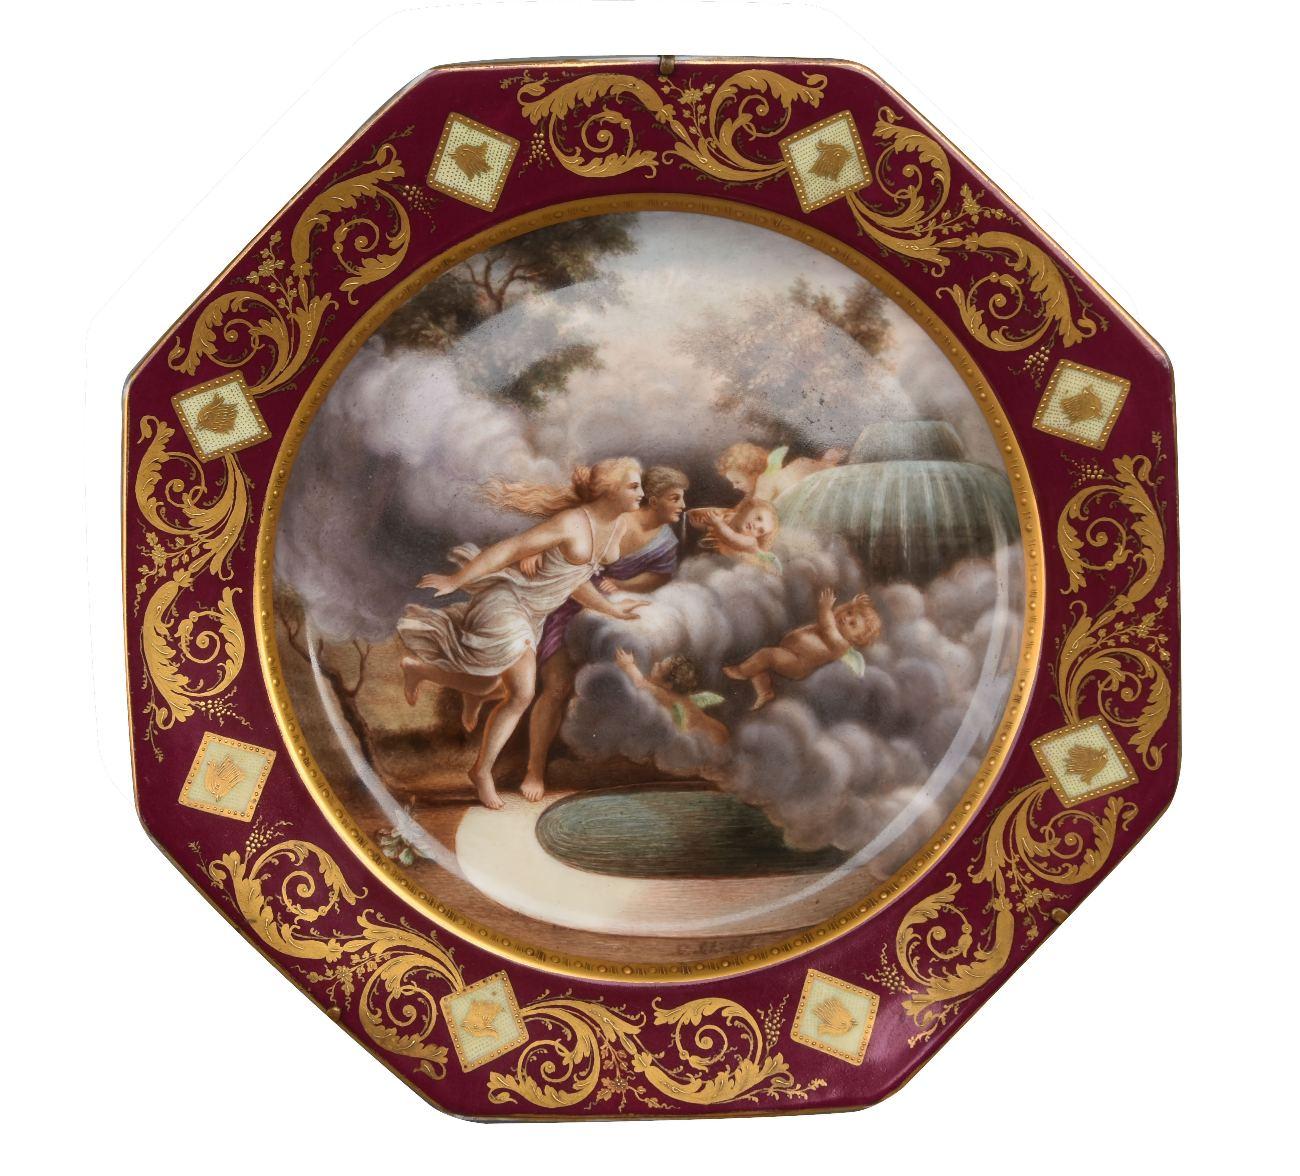 Pair of Vienna manufacture porcelain plates with mythological scene decoration 